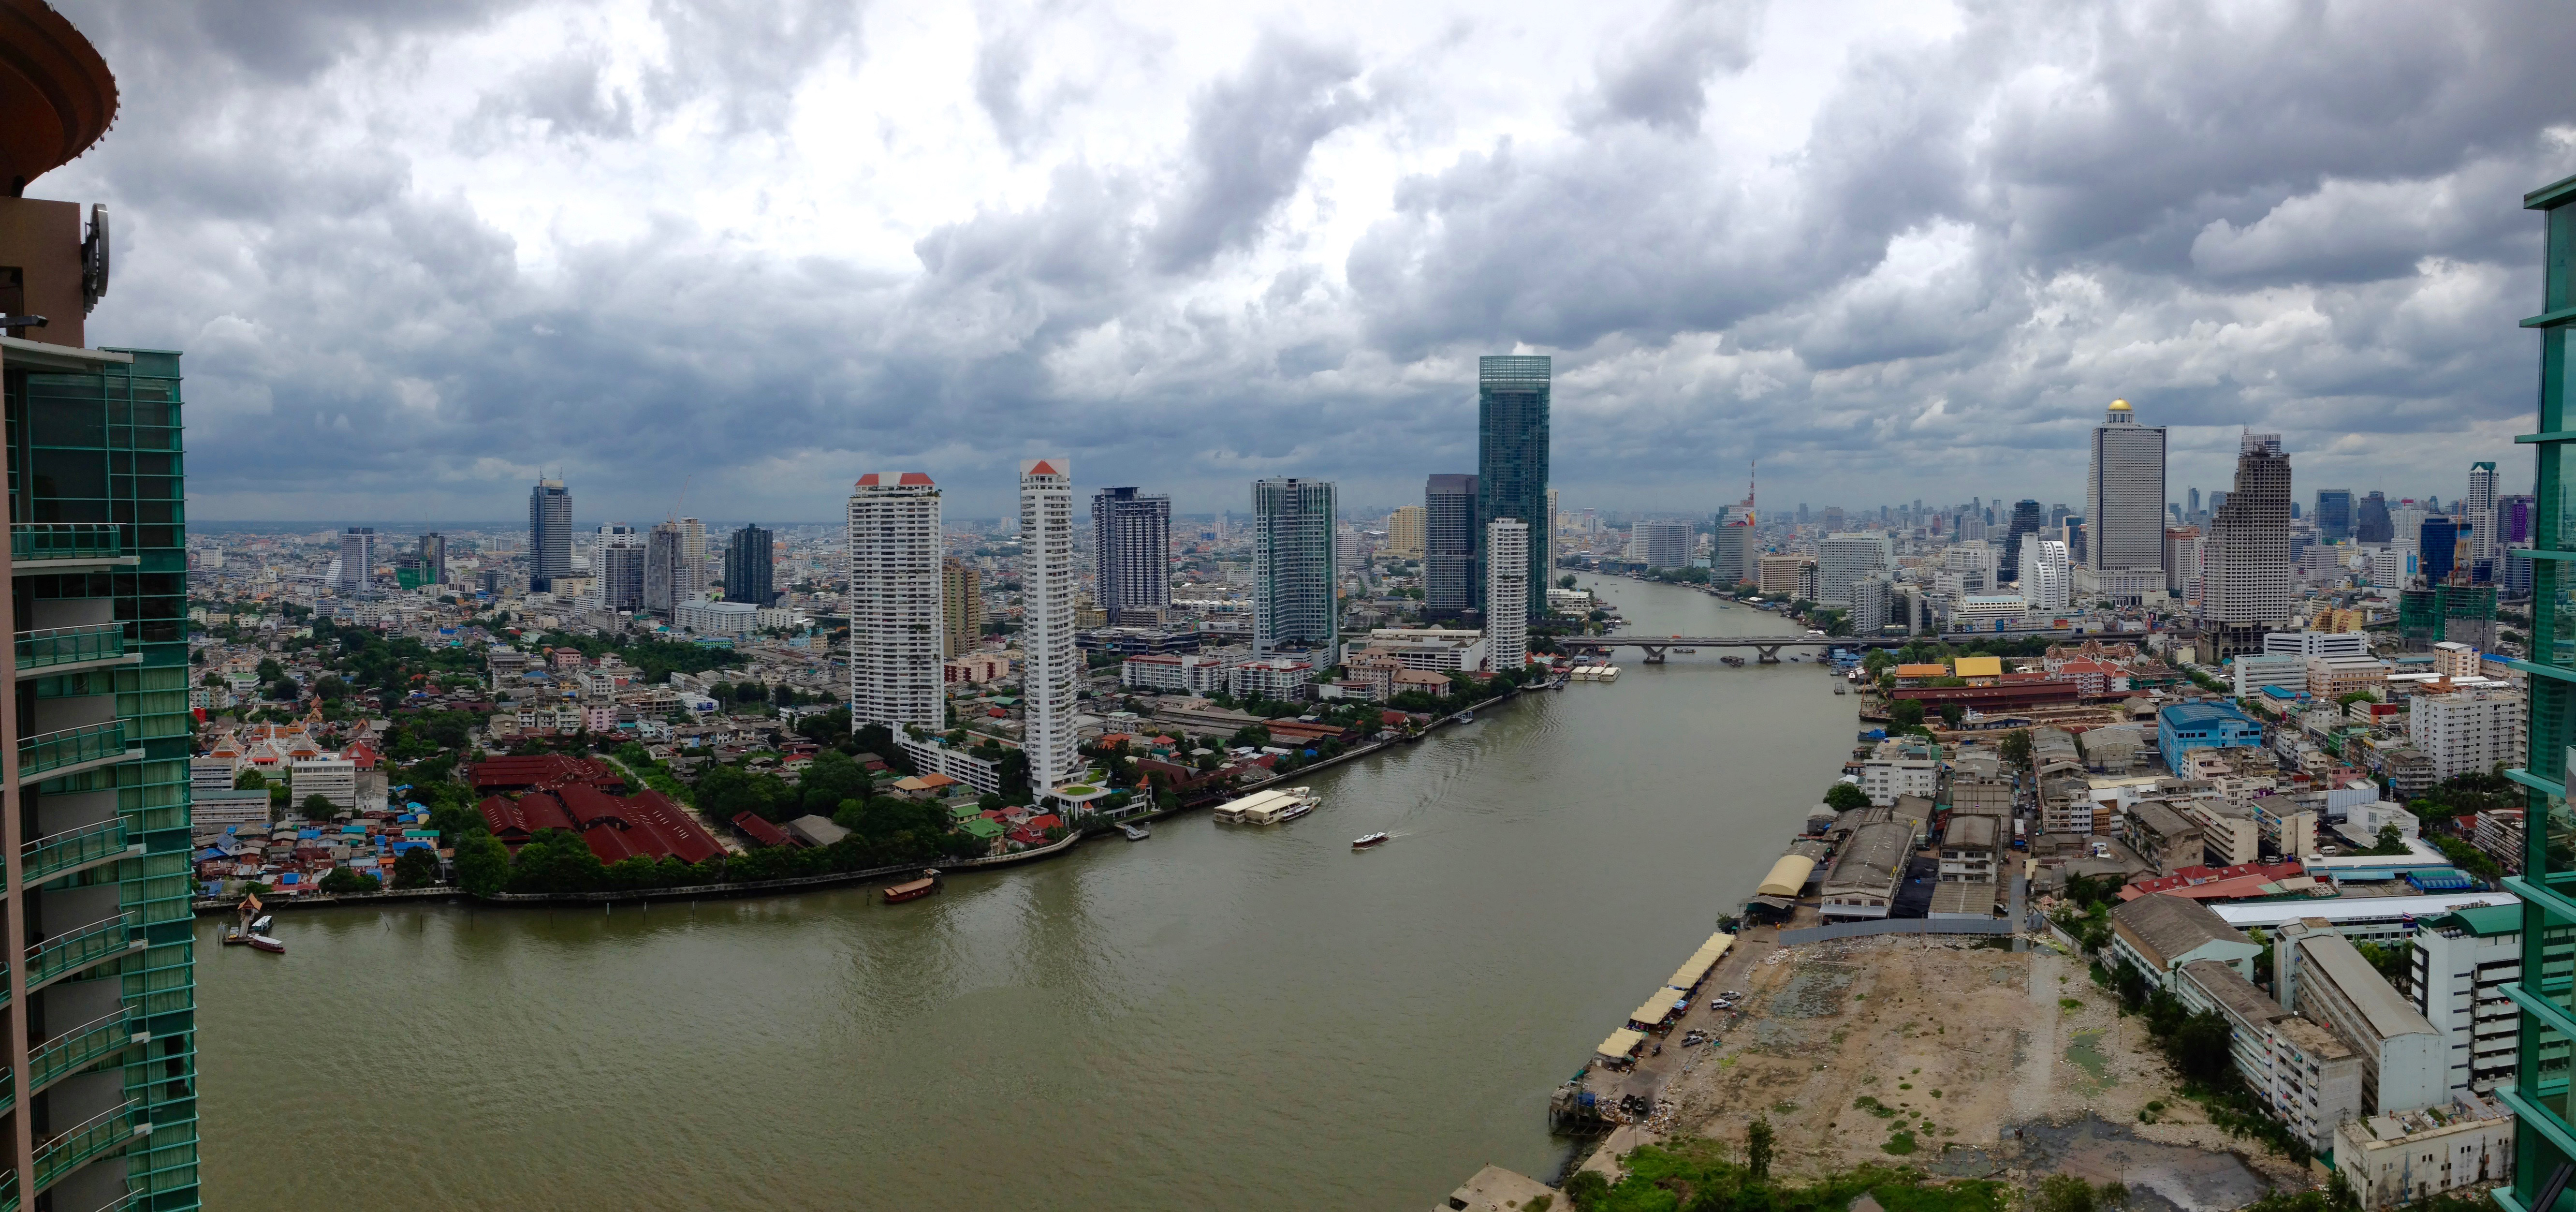 An aerial view of Bangkok showing skyscrapers on both sides of a river.